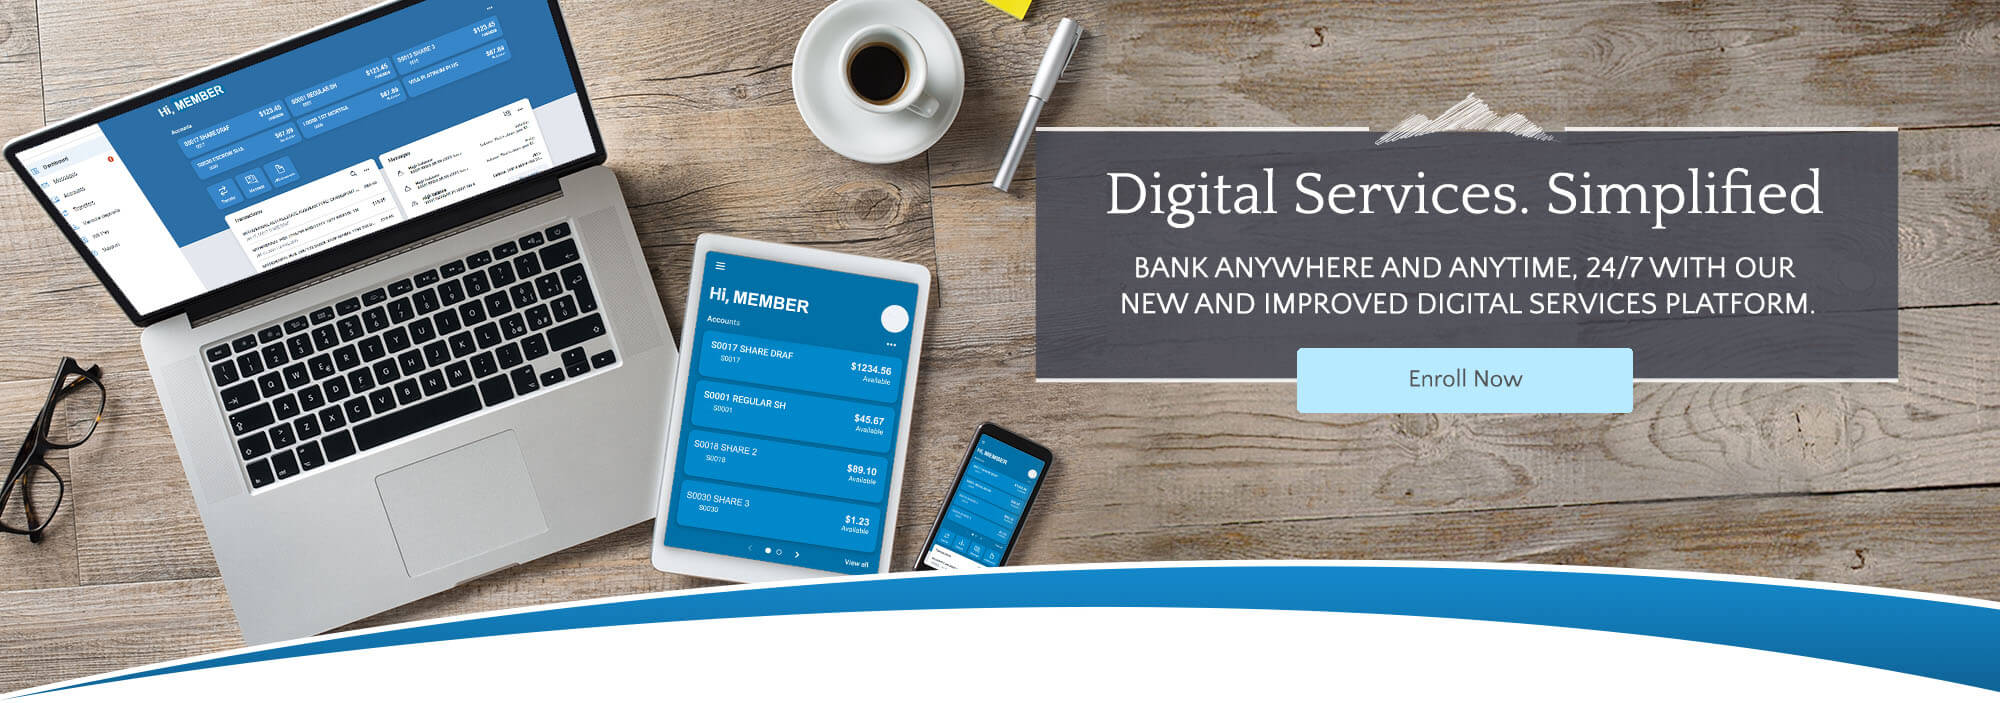 Digital Services. Simplified